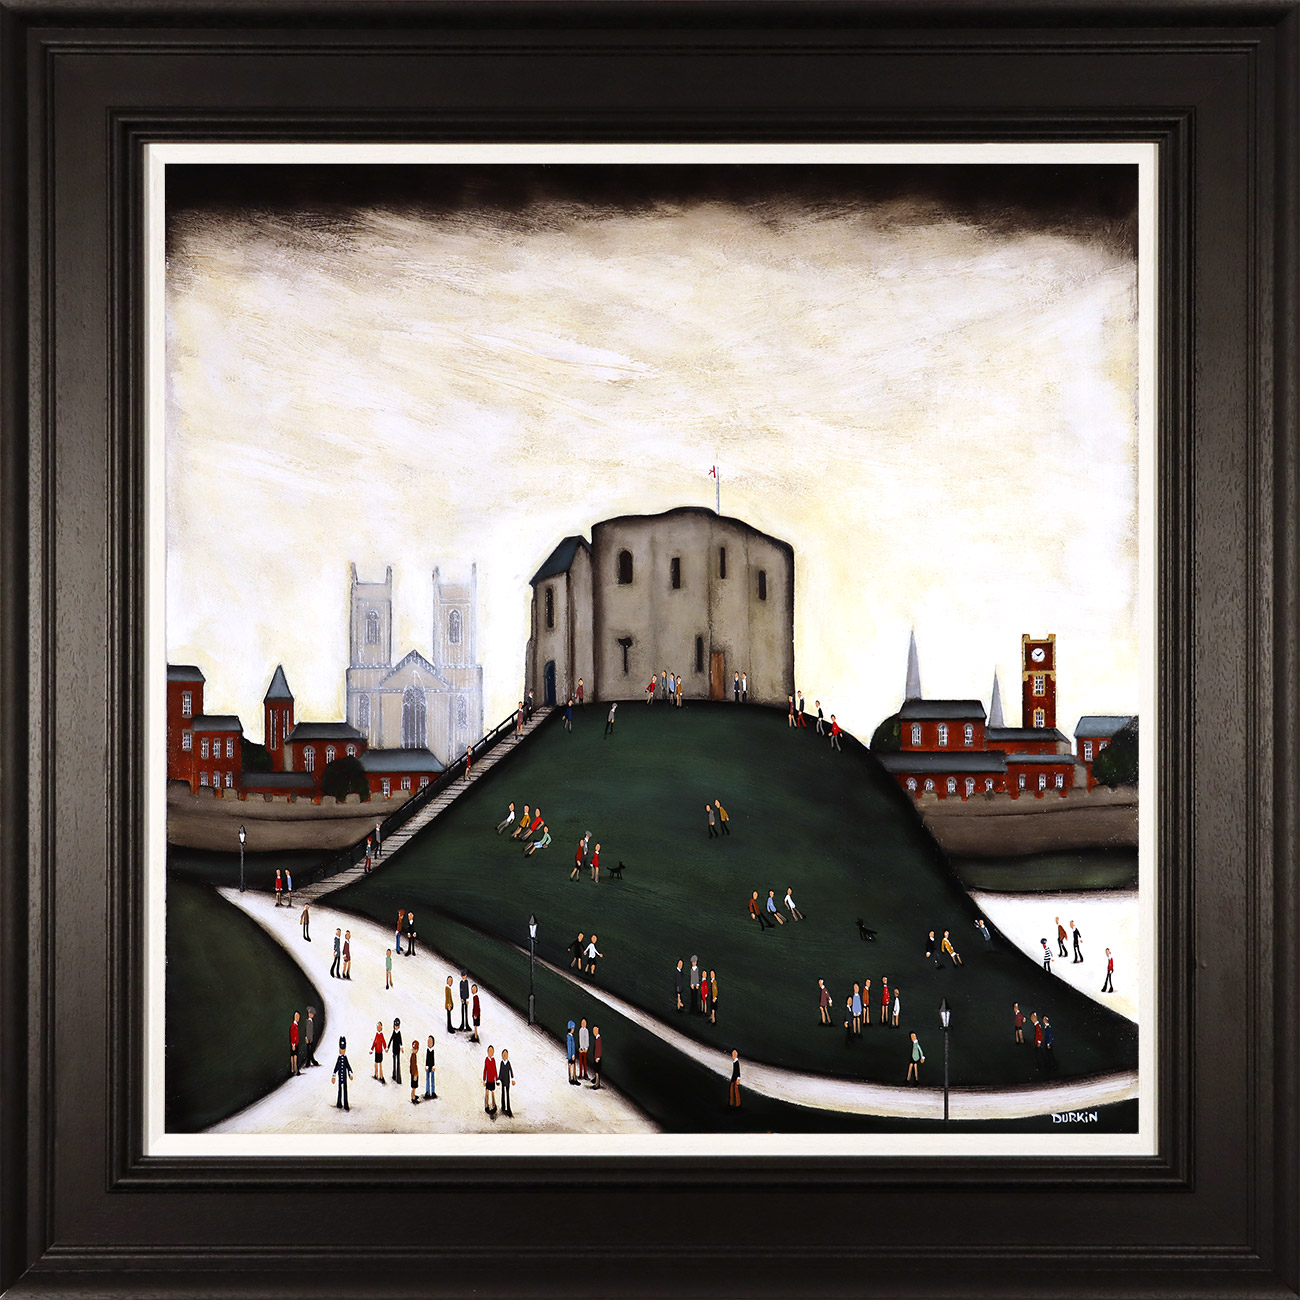 Sean Durkin, Original oil painting on panel, Clifford's Tower, click to enlarge